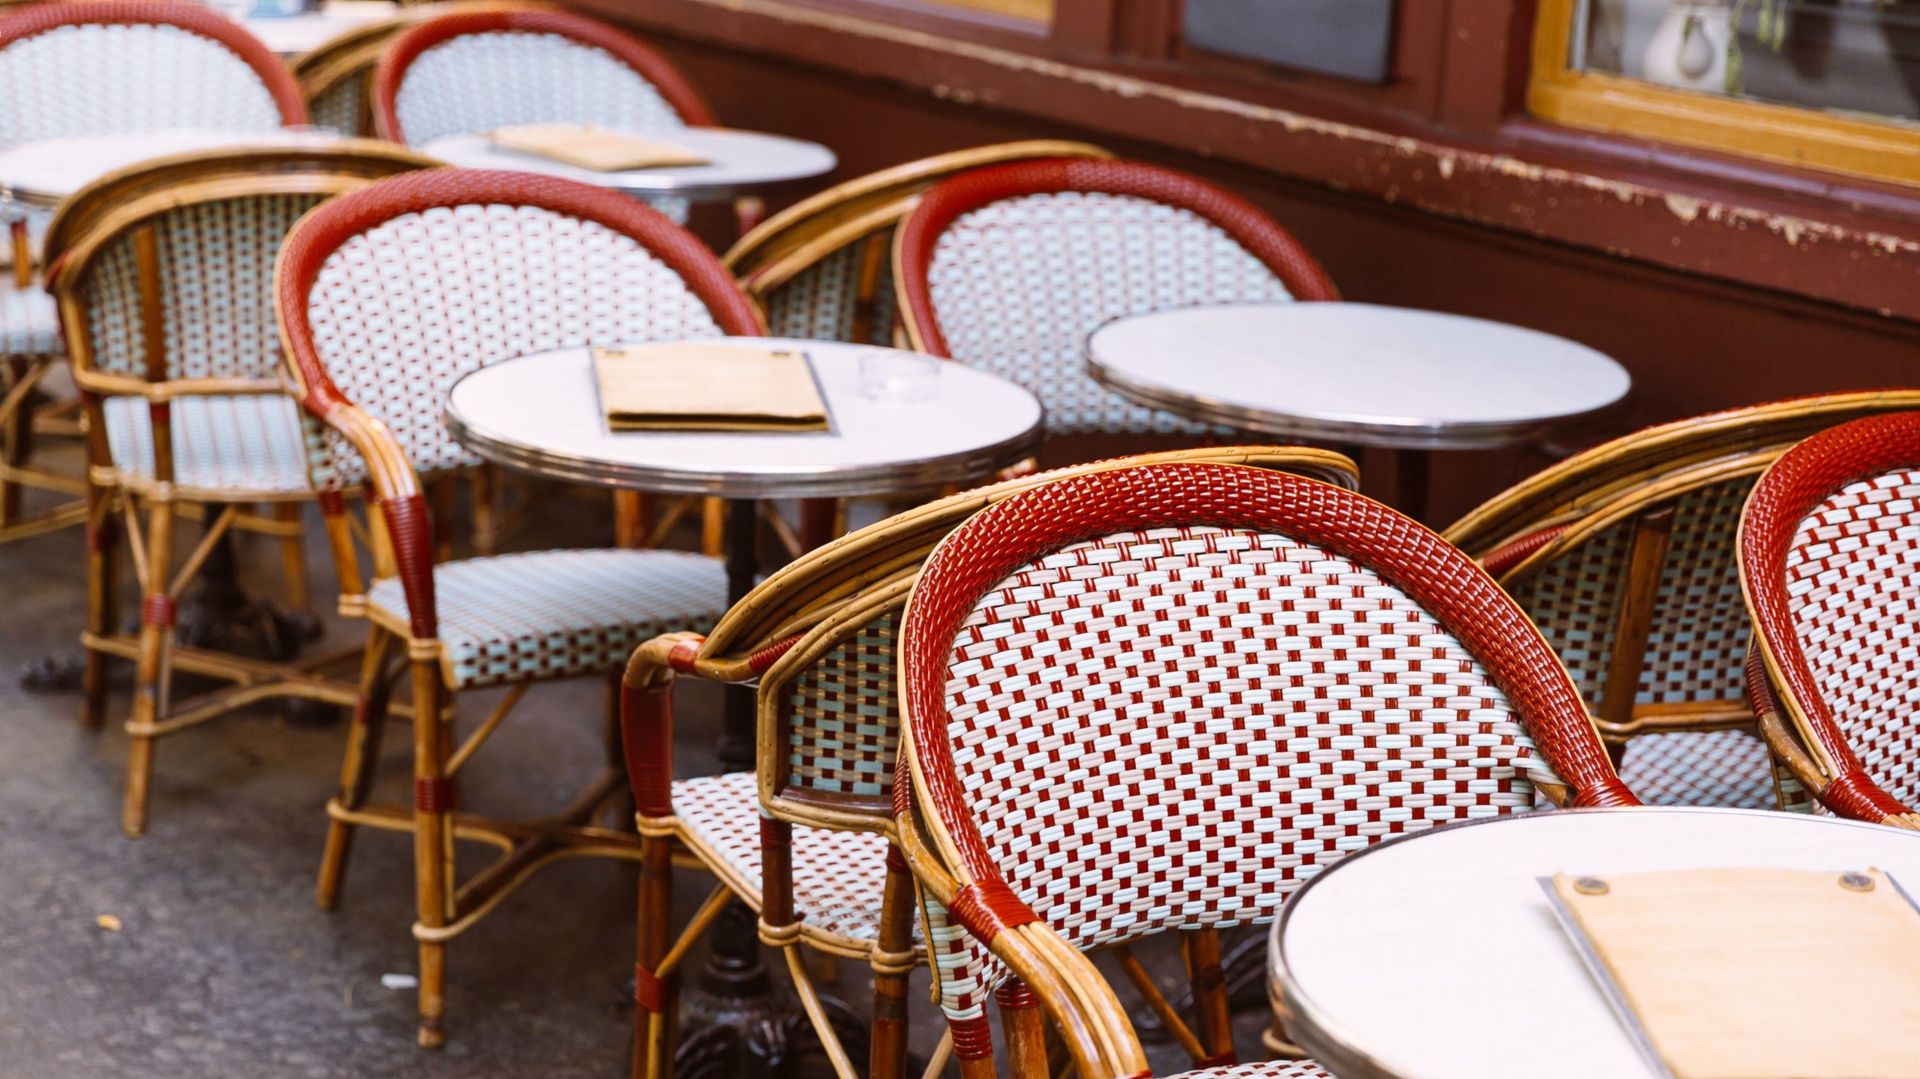 Chairs and table in a traditional Parisian sidewalk cafe